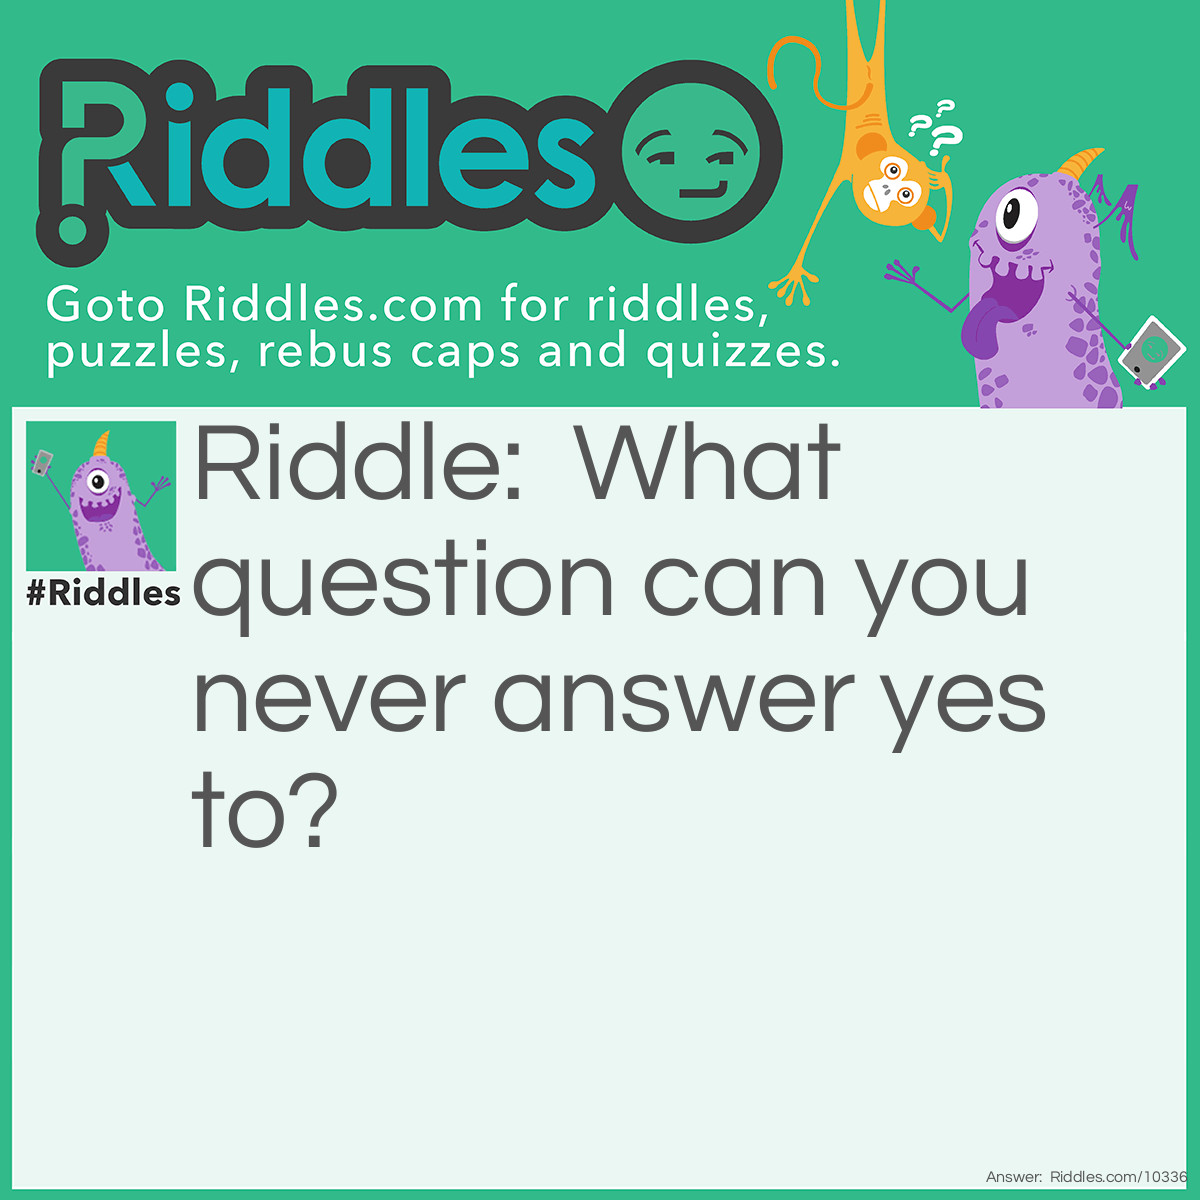 Riddle: What question can you never answer yes to? Answer: Are you asleep yet.